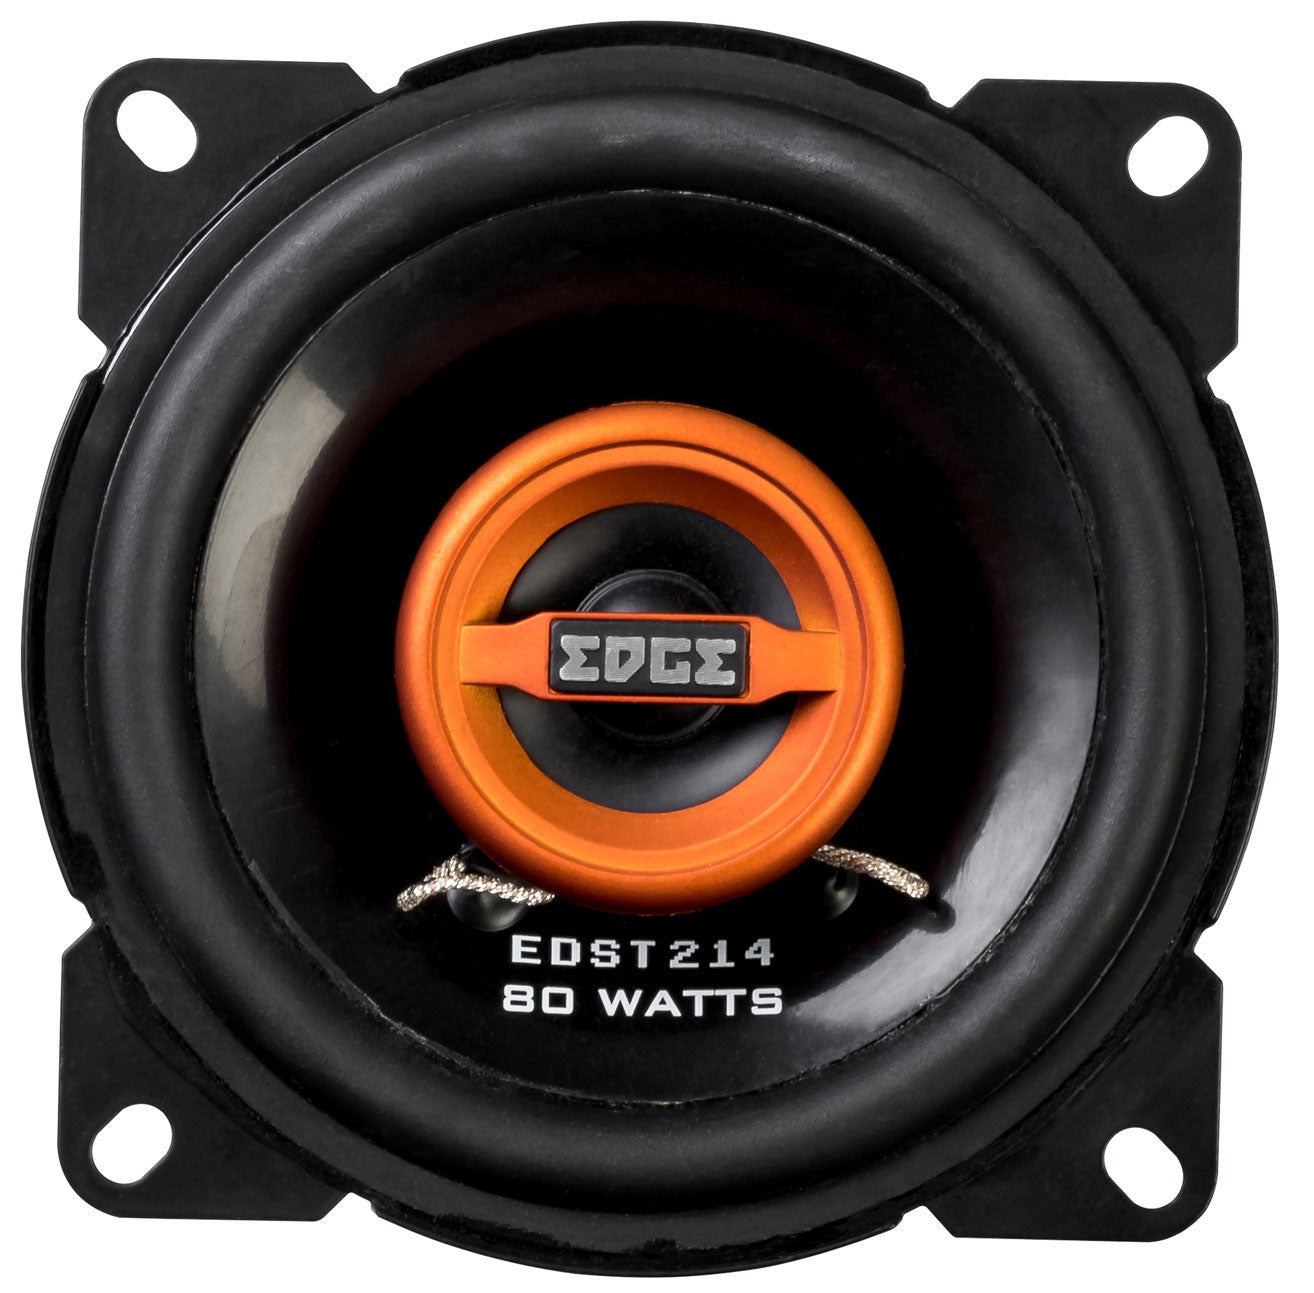 EDST214-E6 | EDGE Street Series 4 inch 80 watts Coaxial Speakers - Pair